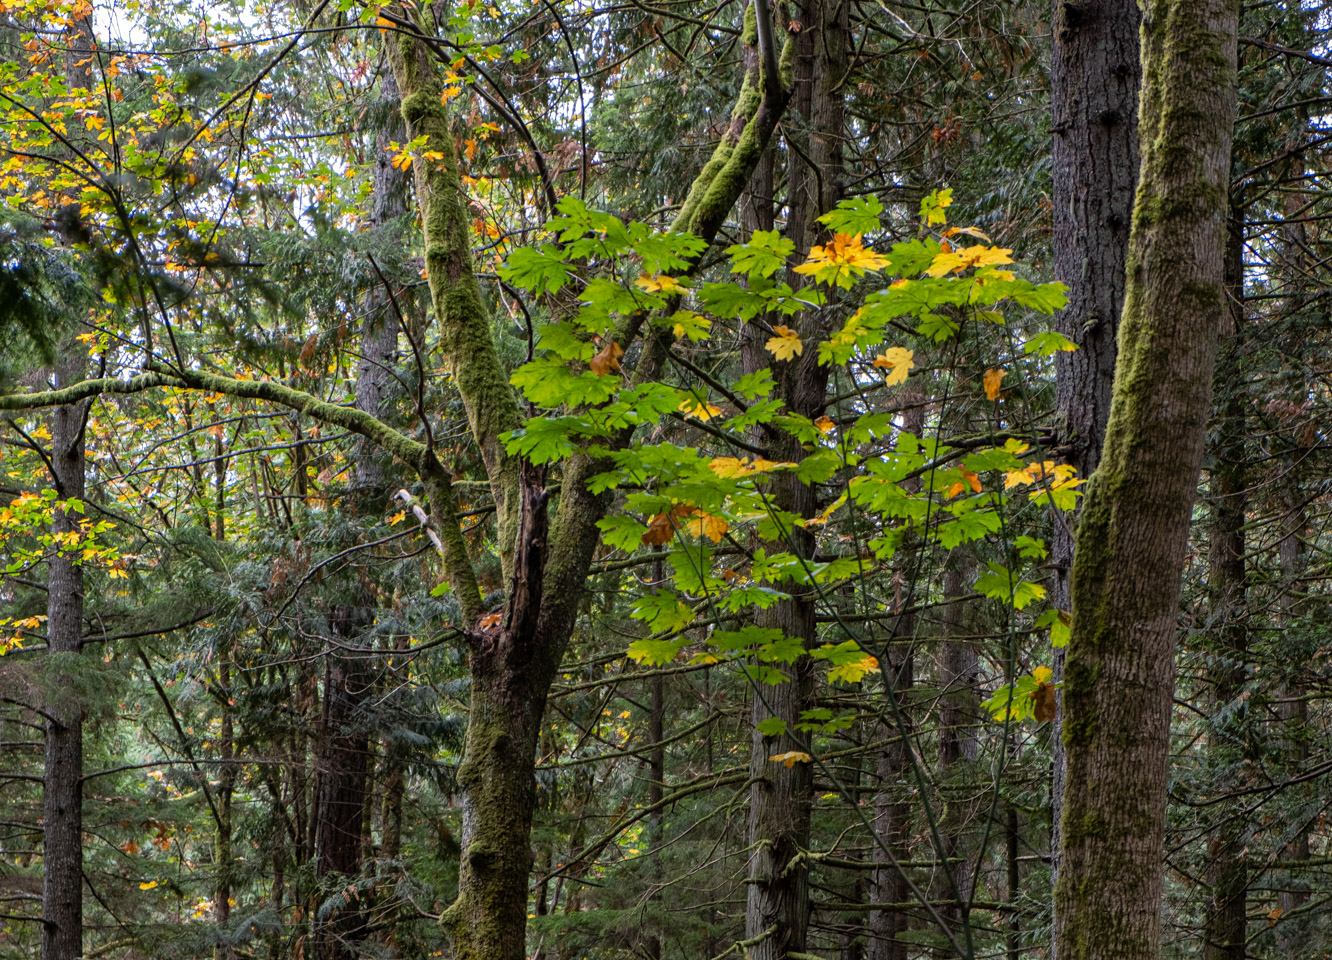 Deciduous leaves in an evergreen forest, starting to show fall colors